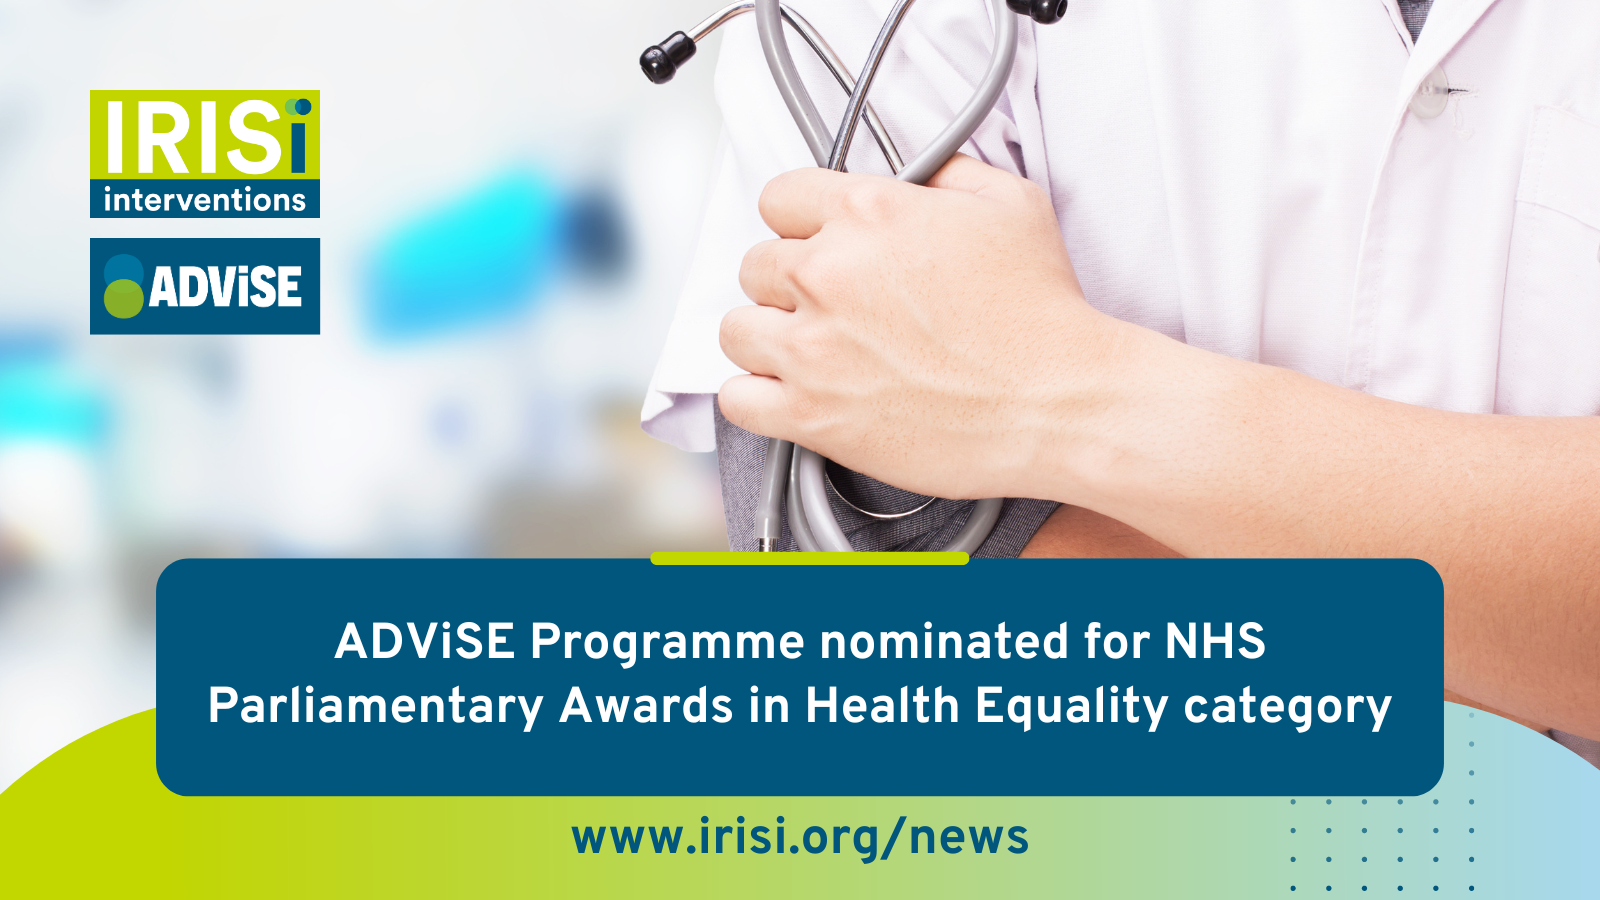 This nomination underscores the programme's remarkable efforts in addressing domestic abuse and sexual violence within sexual health settings, contributing significantly to reducing health inequalities and ensuring equitable access to healthcare services.